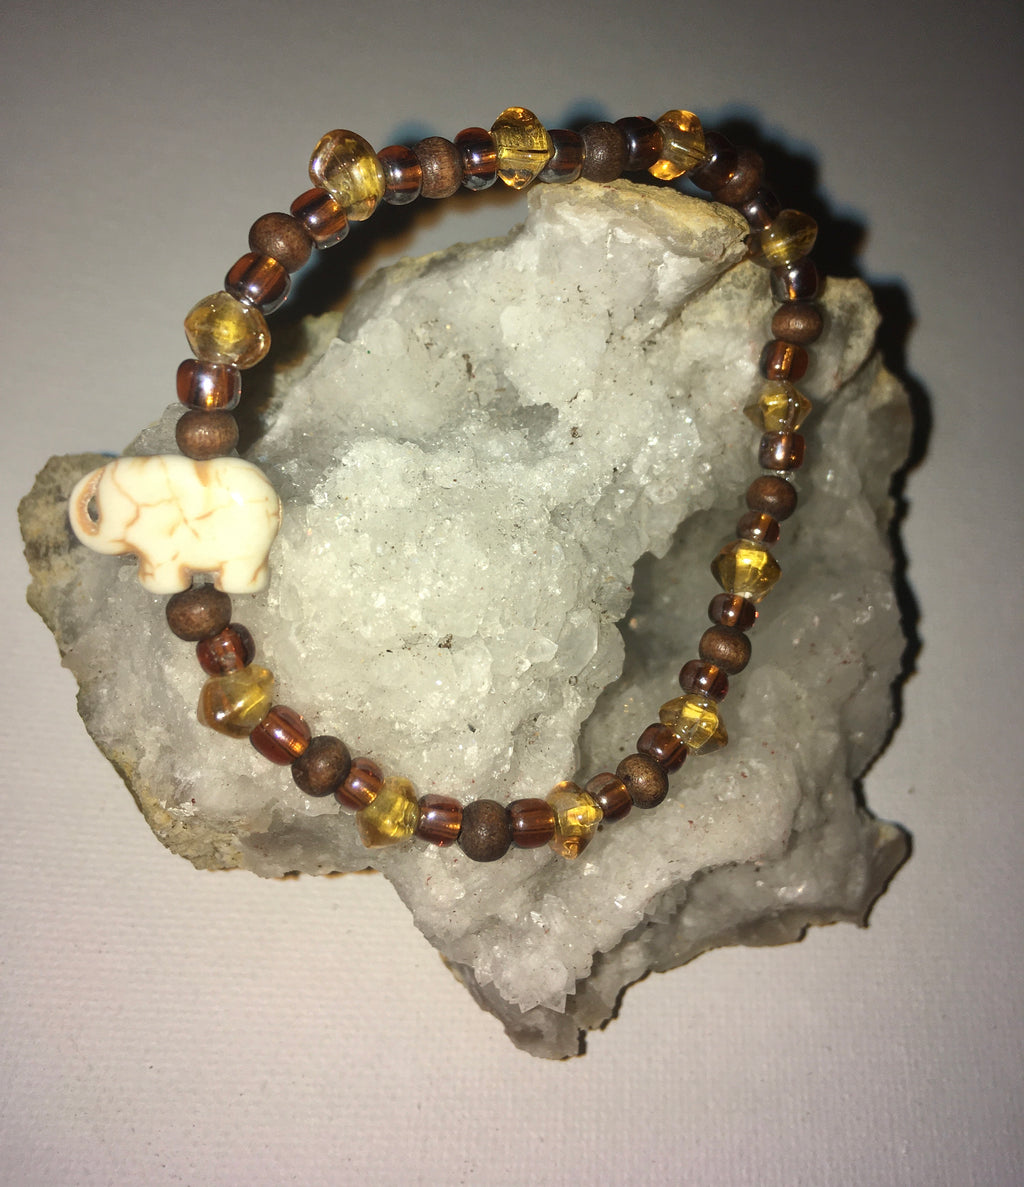 Small Elephant Bracelet With Yellow, Amber and Wood Beads Bracelet